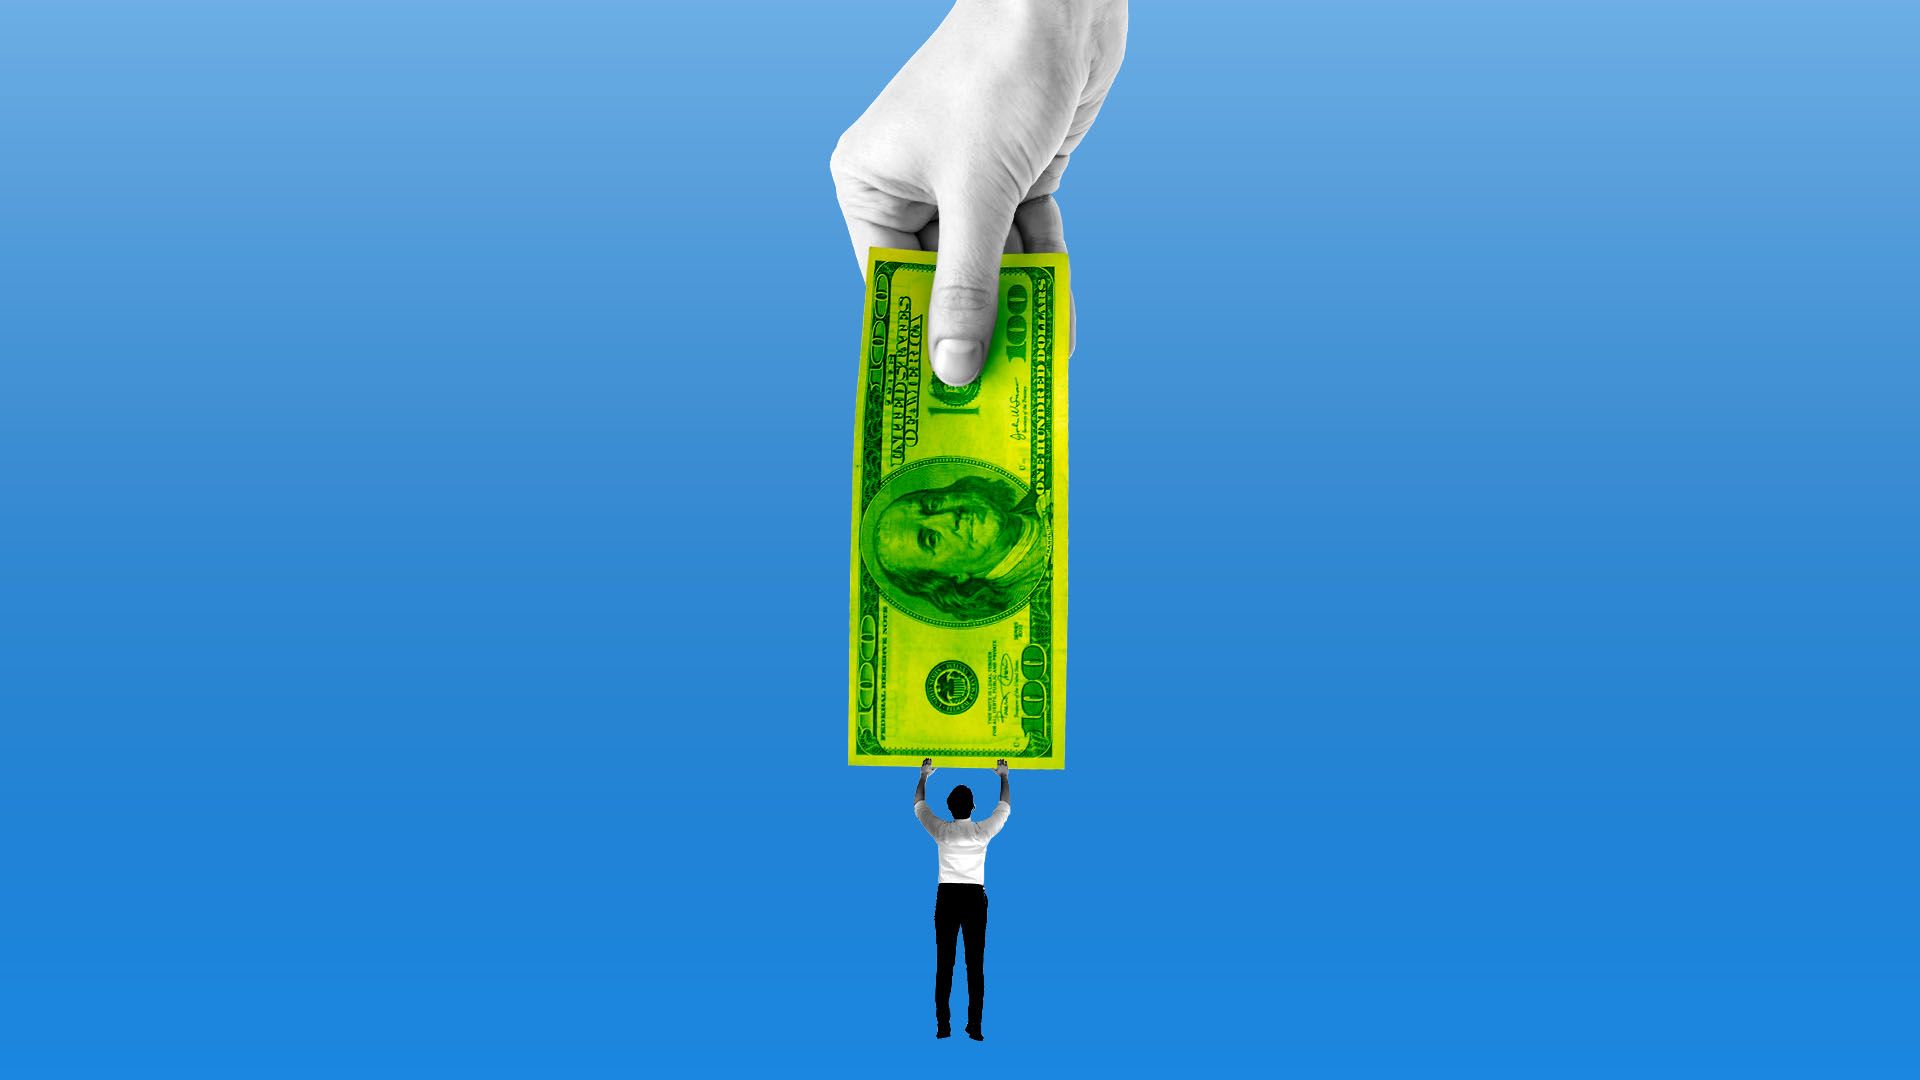 Illustration of little guy clinging to a giant dollar held by hand above him